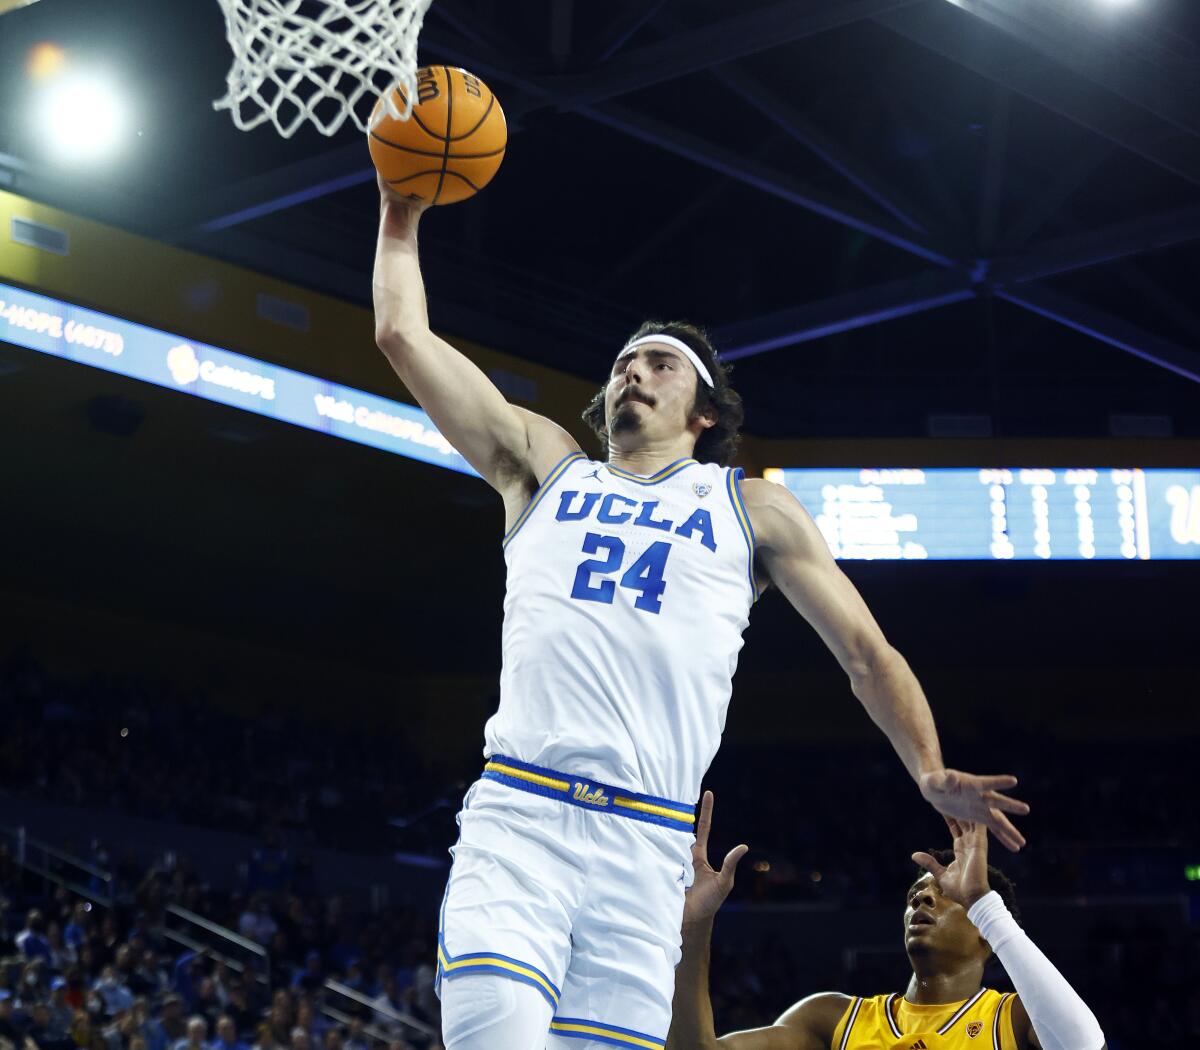 UCLA's Jaime Jaquez Jr. dunks in front of Arizona State's Alonzo Gaffney during the first half Thursday at Pauley Pavilion.